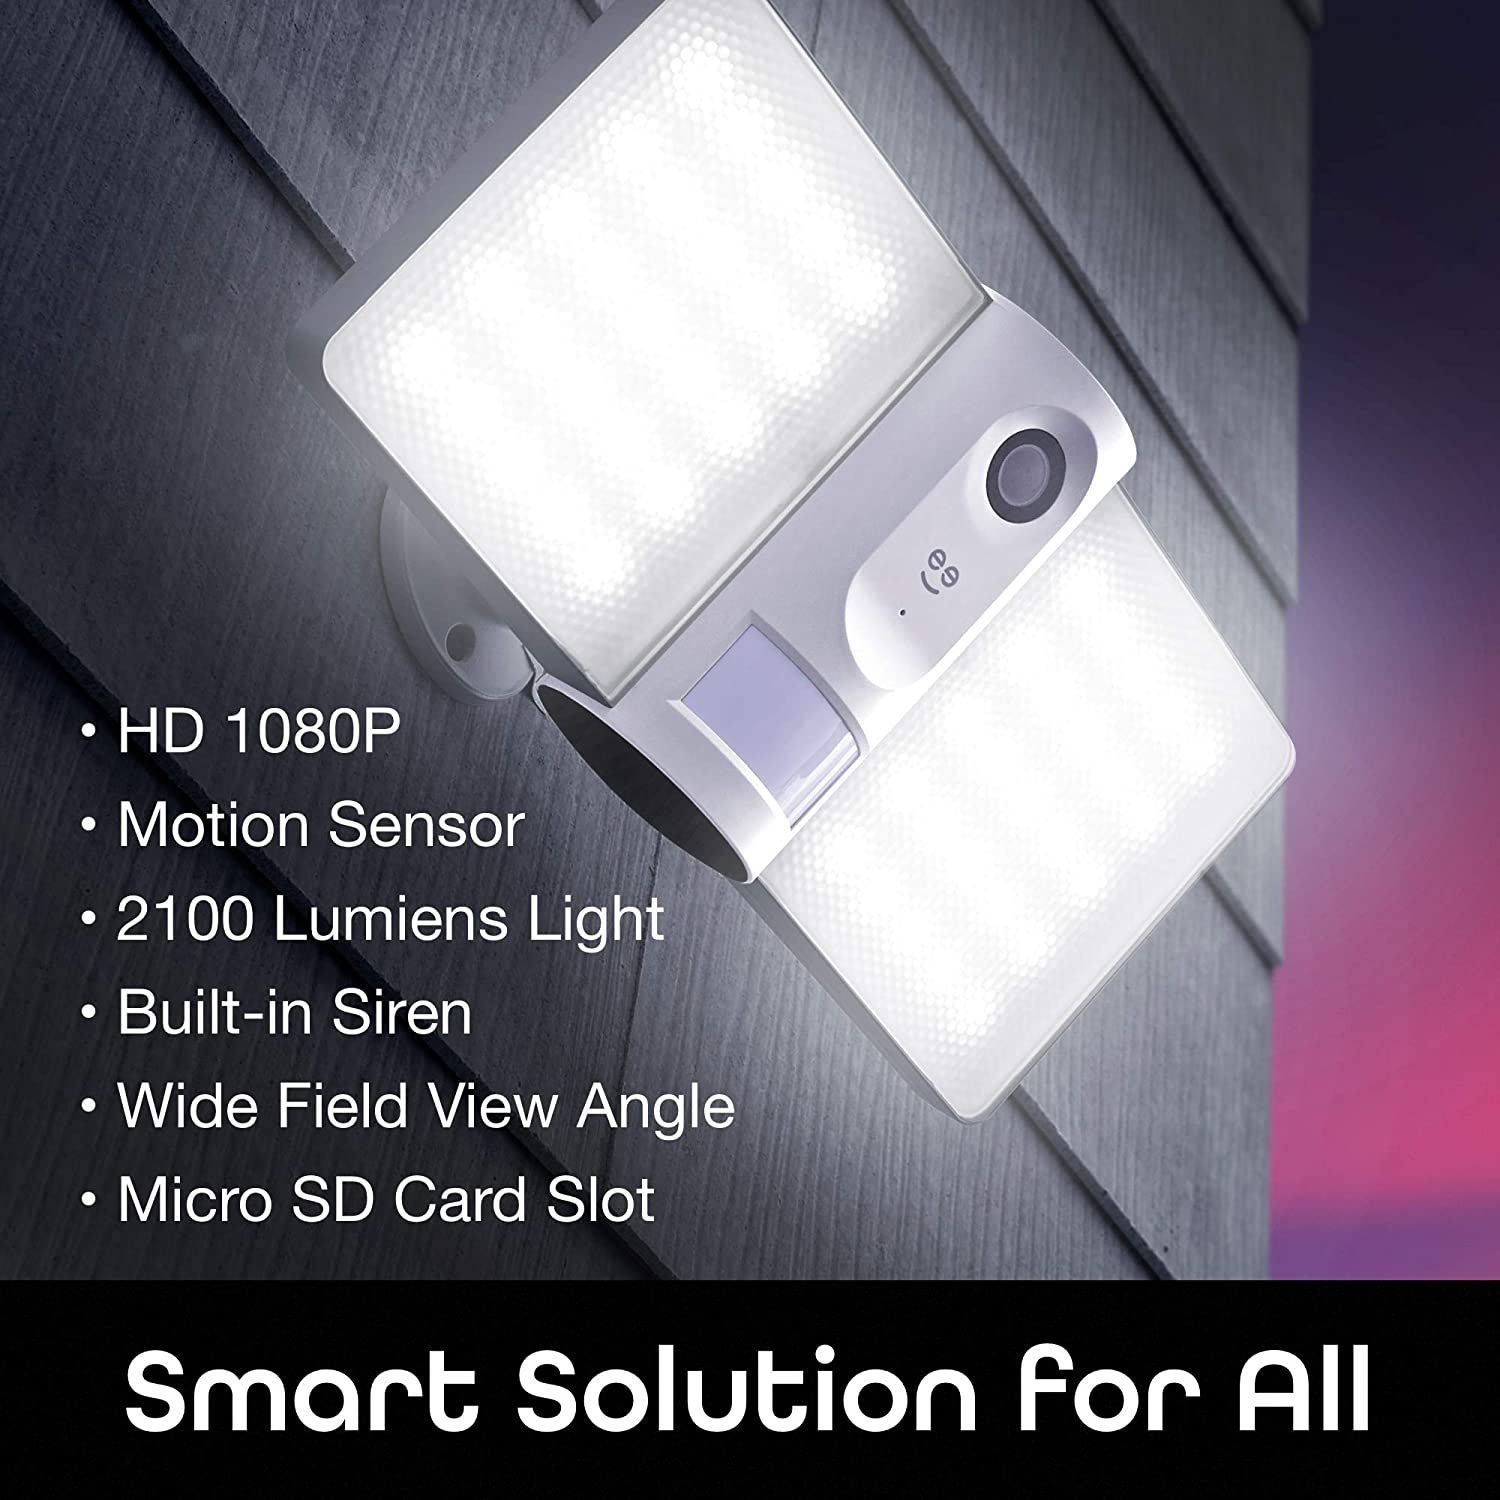 Geeni Sentry Wireless Smart Floodlight's several features for home security